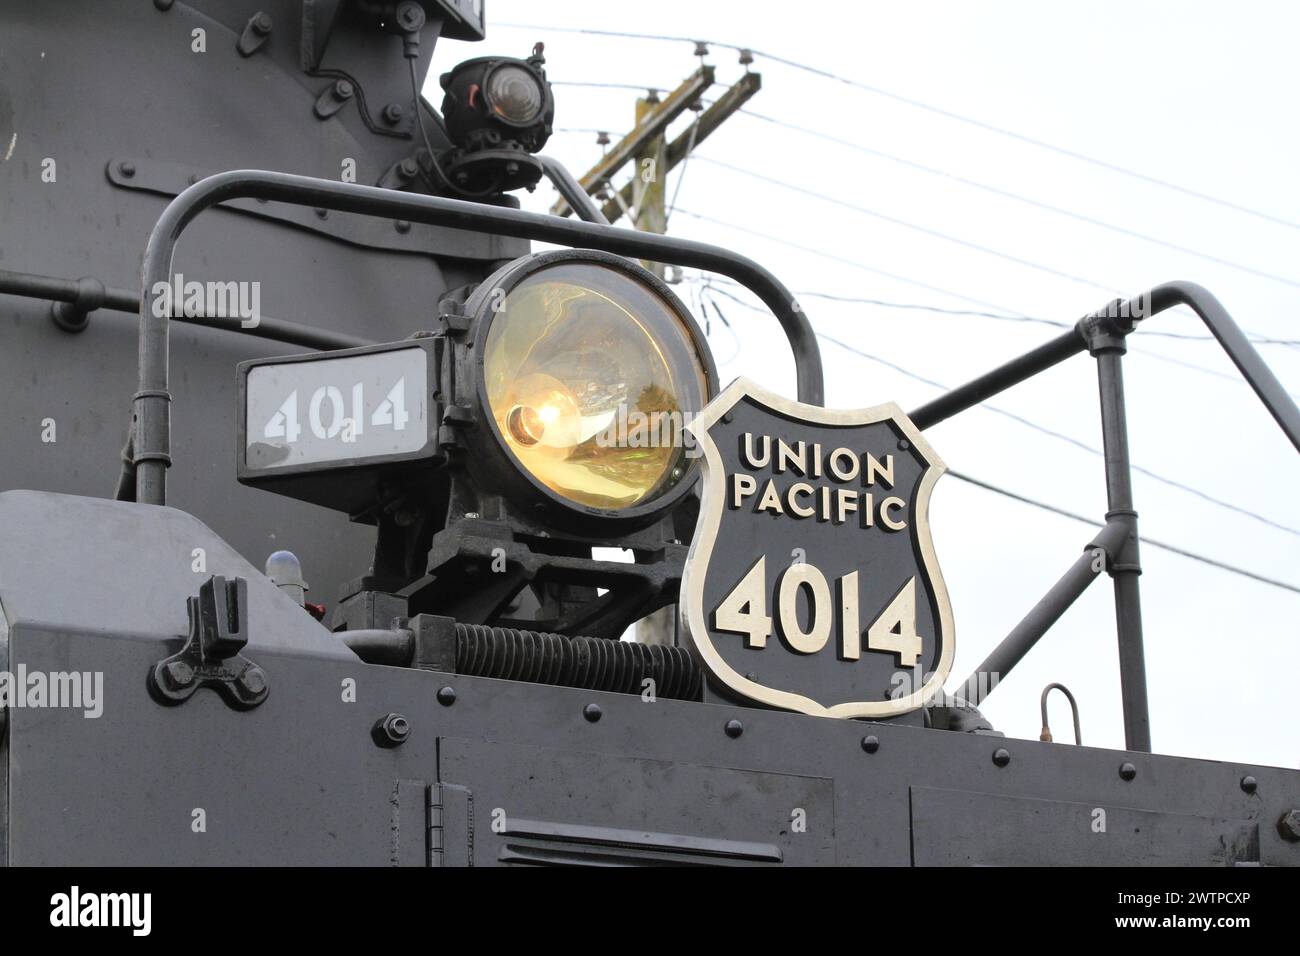 Big Boy 4014 Union Pacific Steam Train in Ellsworth Kansas USA that was on a Historical Day. Stock Photo